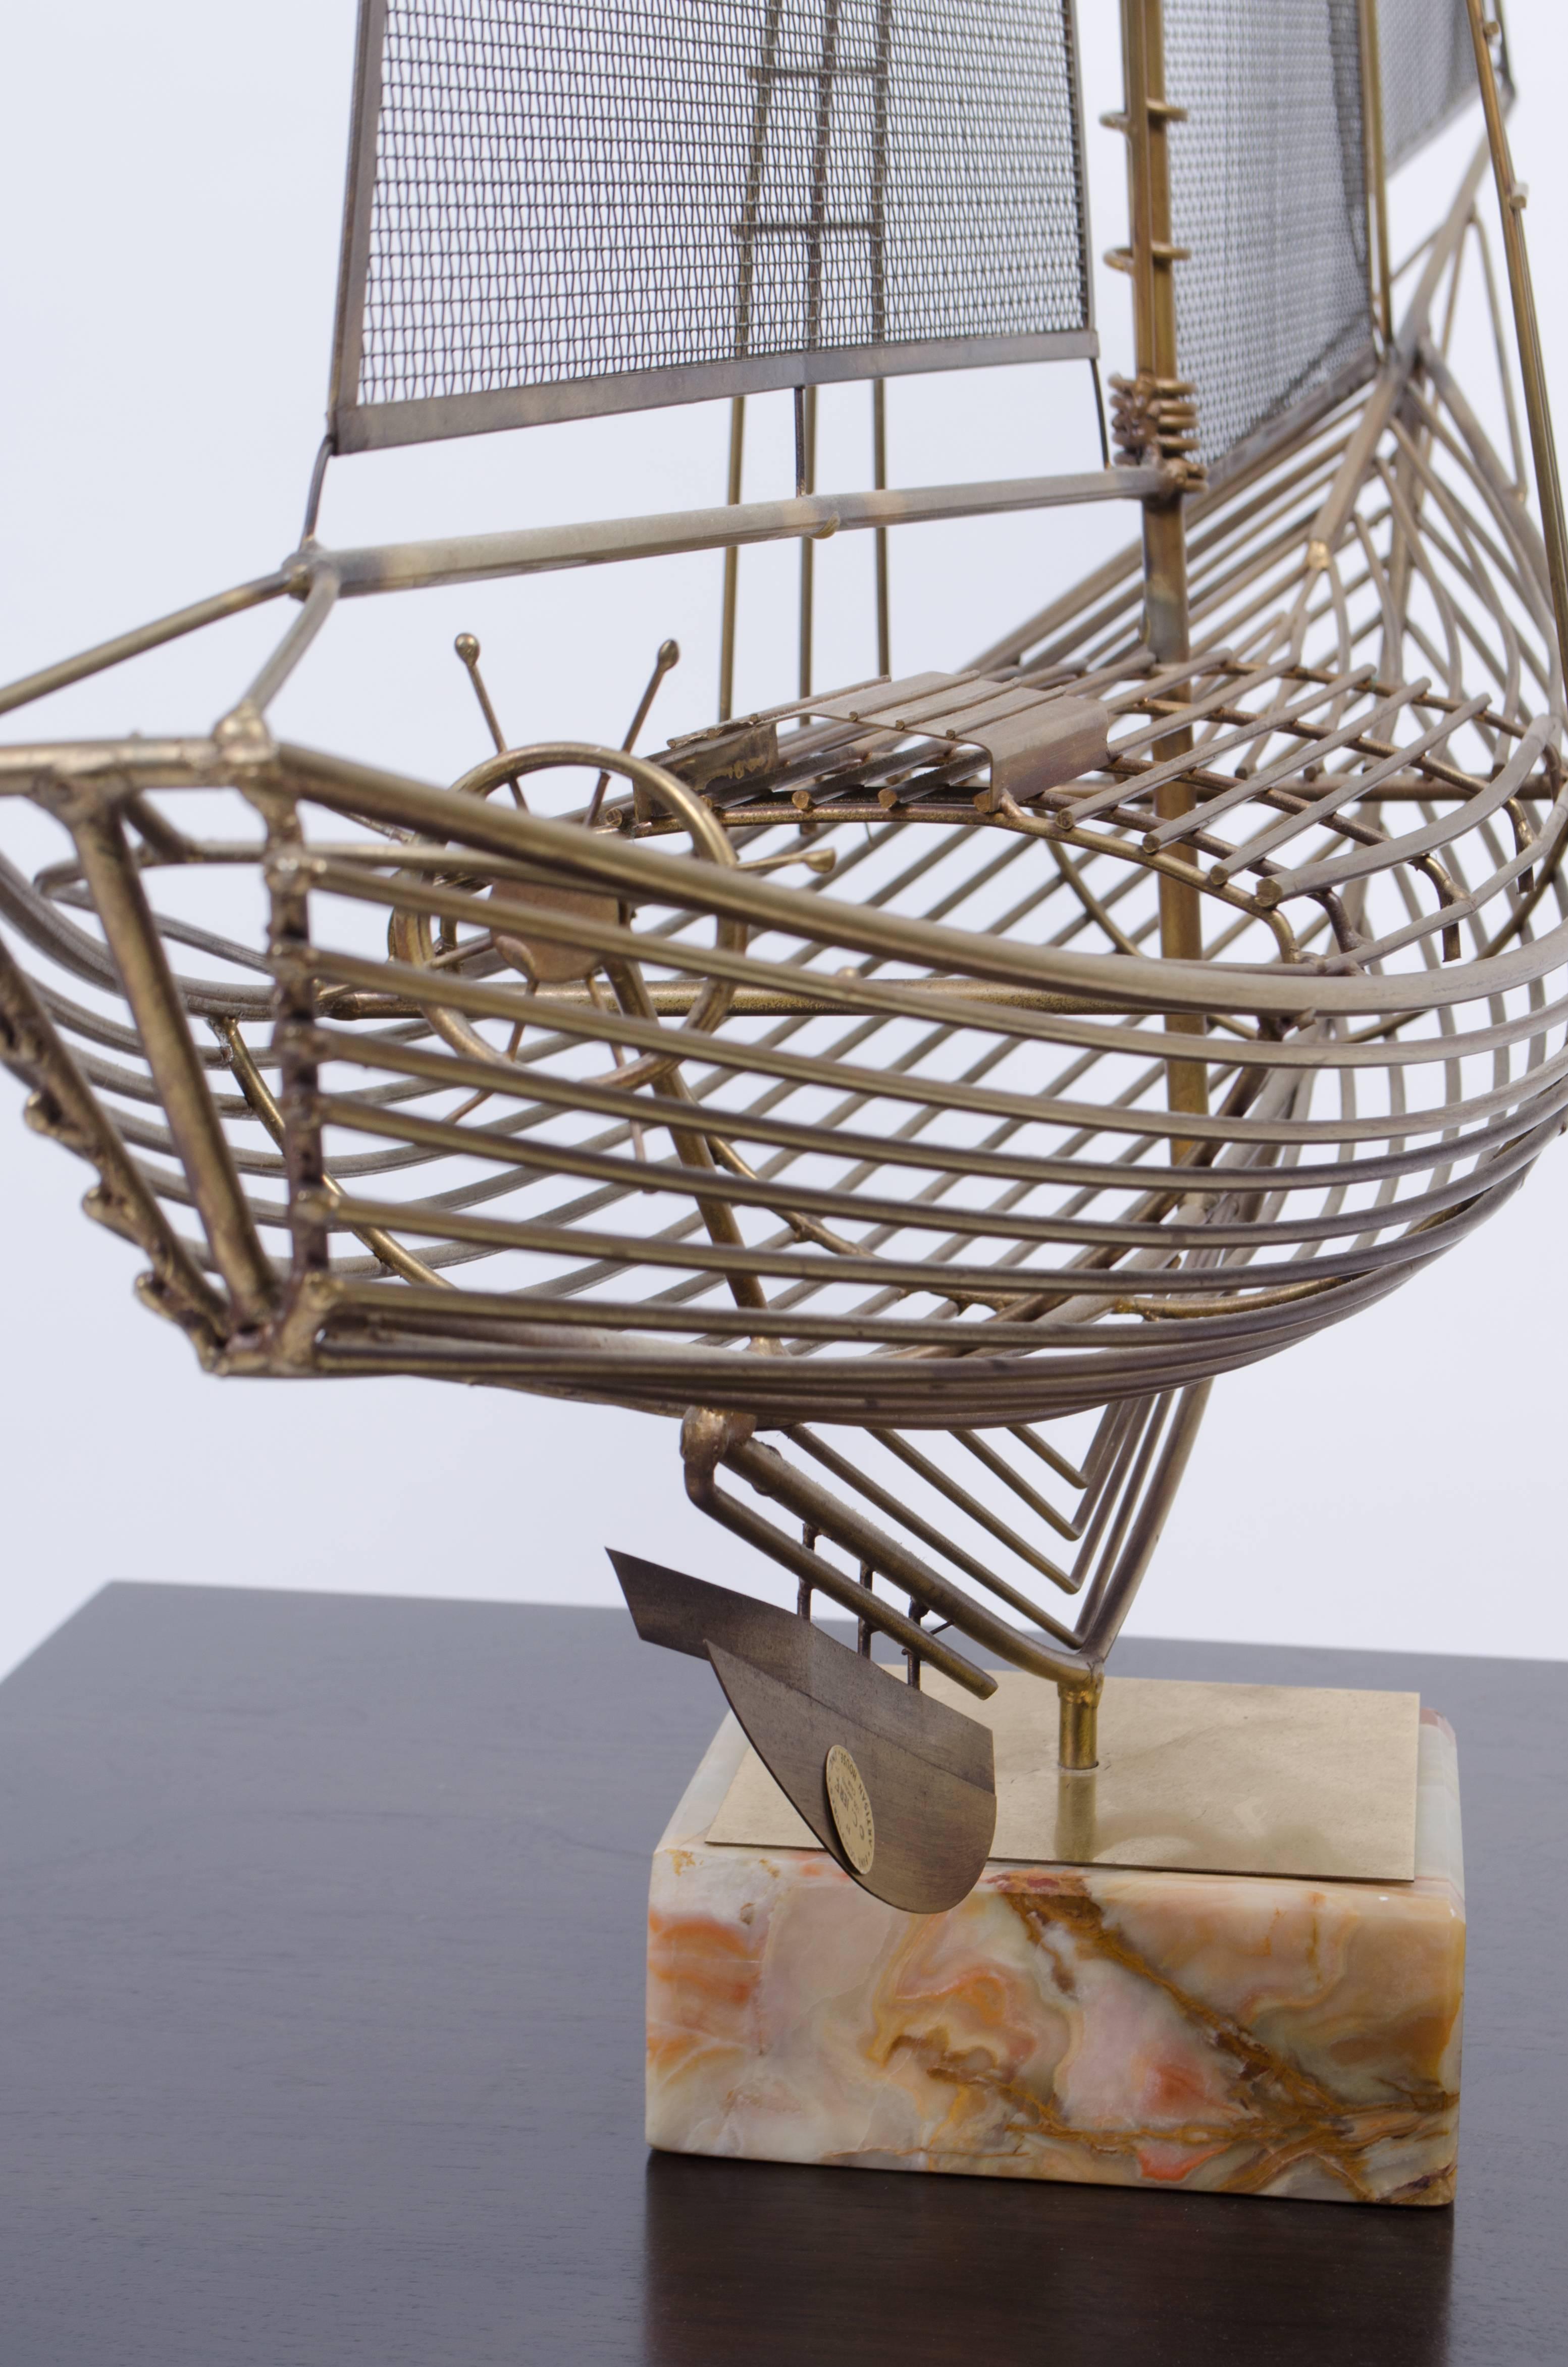 Pefection! Gaze at the intricacies of C. Jere's massive brass sail ship, countless rods frame negative space to form the wireframe of the grand vessel. Each sail is made from thin wire mesh, wonderfully done. The ship is mounted upon a polished onyx